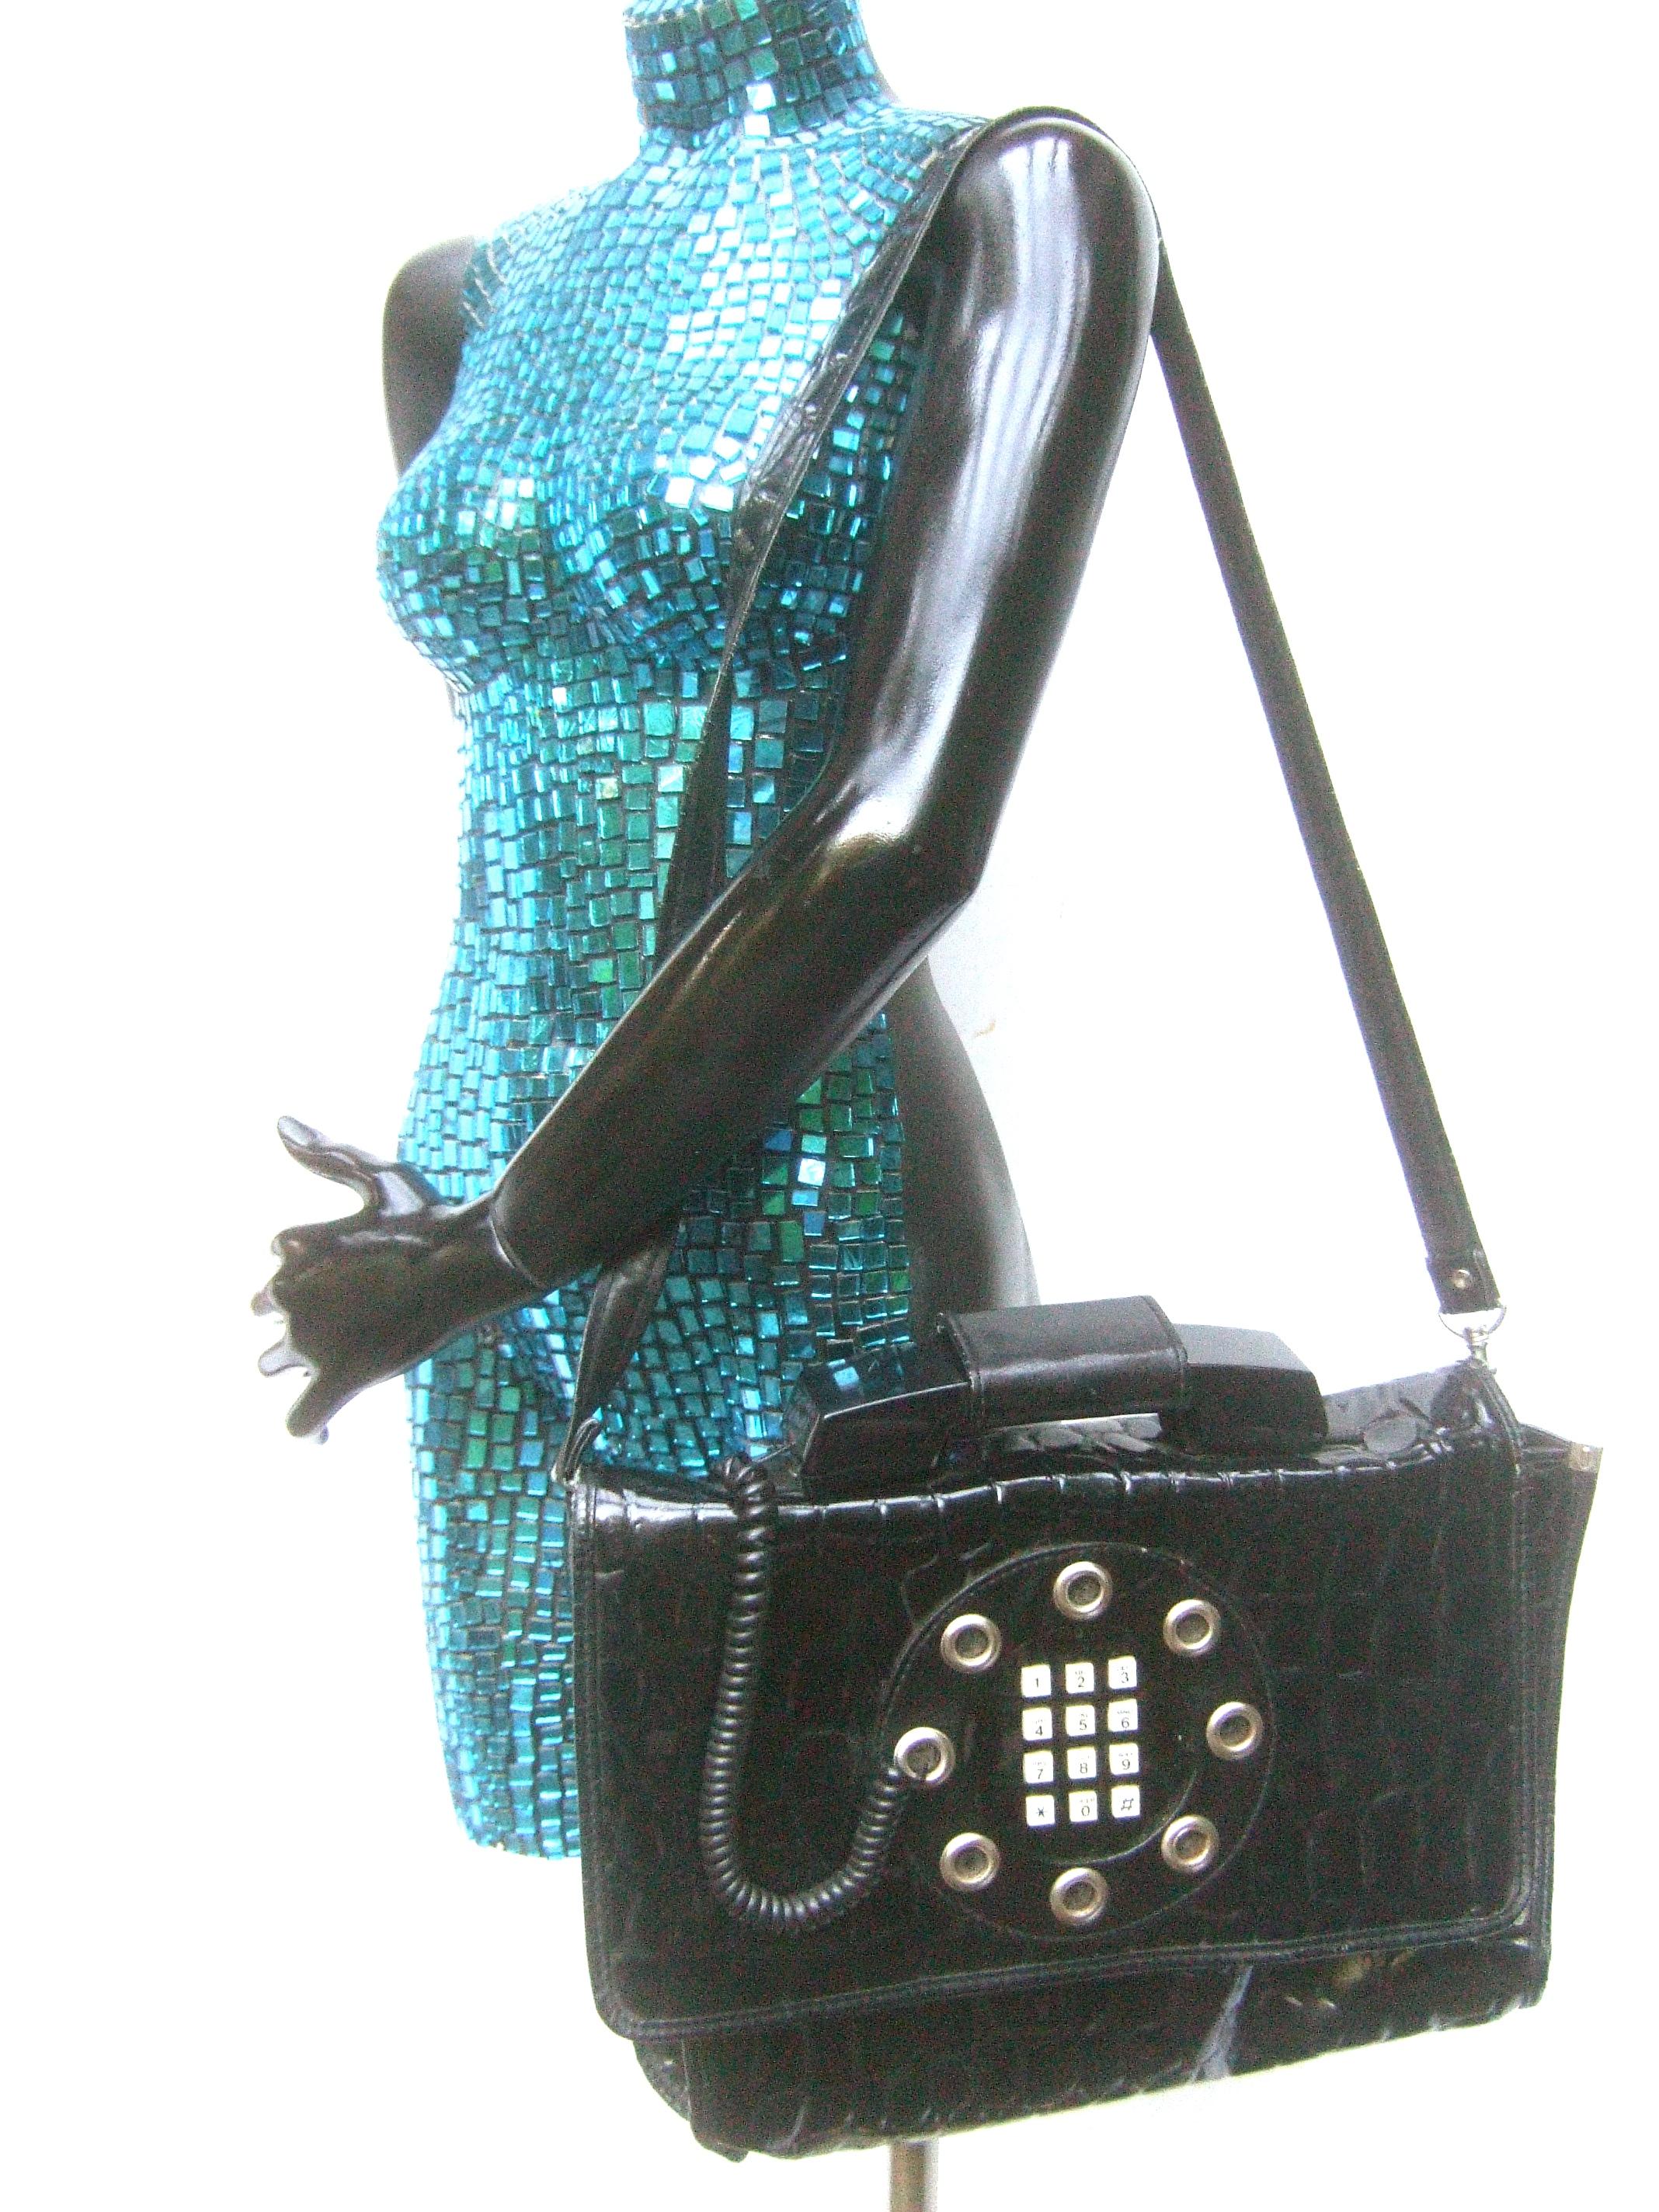 Mod Embossed Black Vinyl Telephone Shoulder Bag c 1980s In Good Condition For Sale In University City, MO